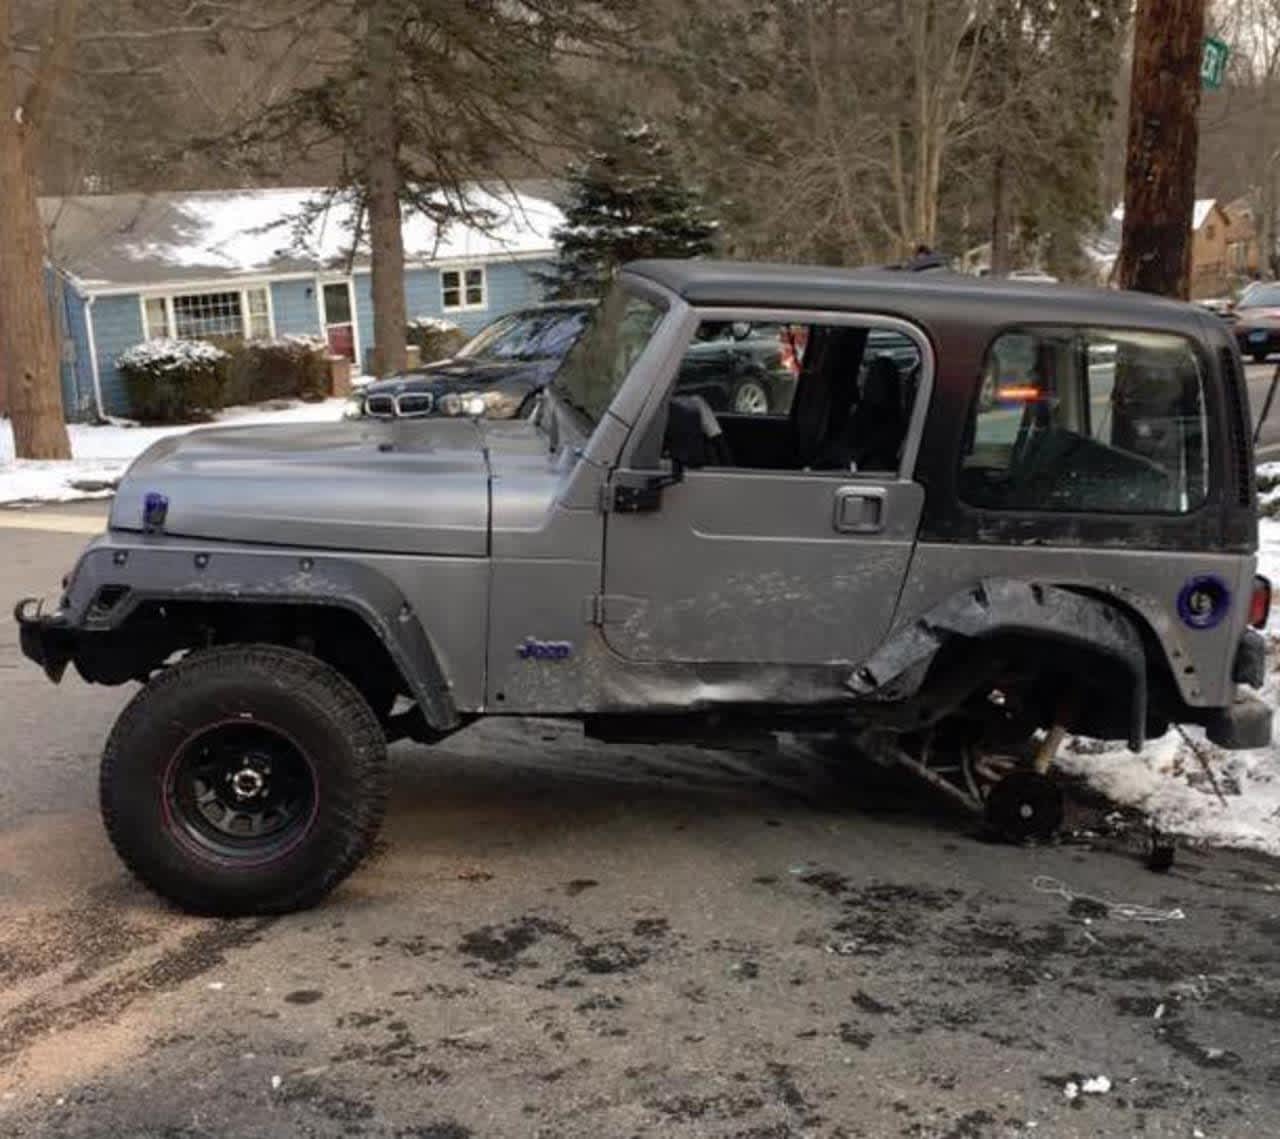 The two-car crash left this jeep without its rear wheels.